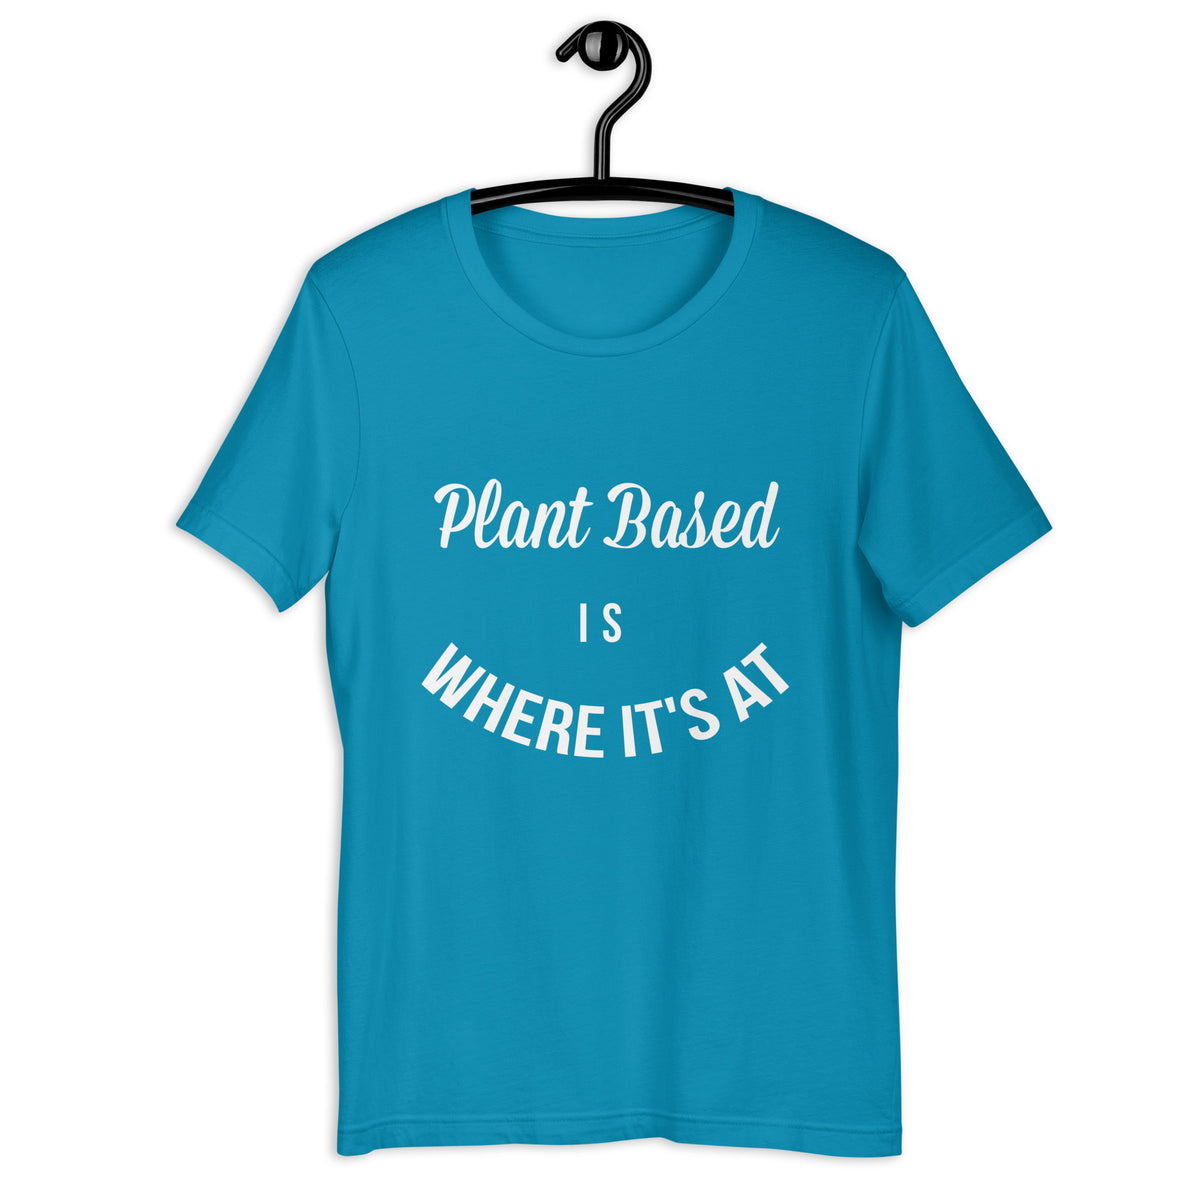 PLANT BASES IS WHERE IT'S AT Colored t-shirt